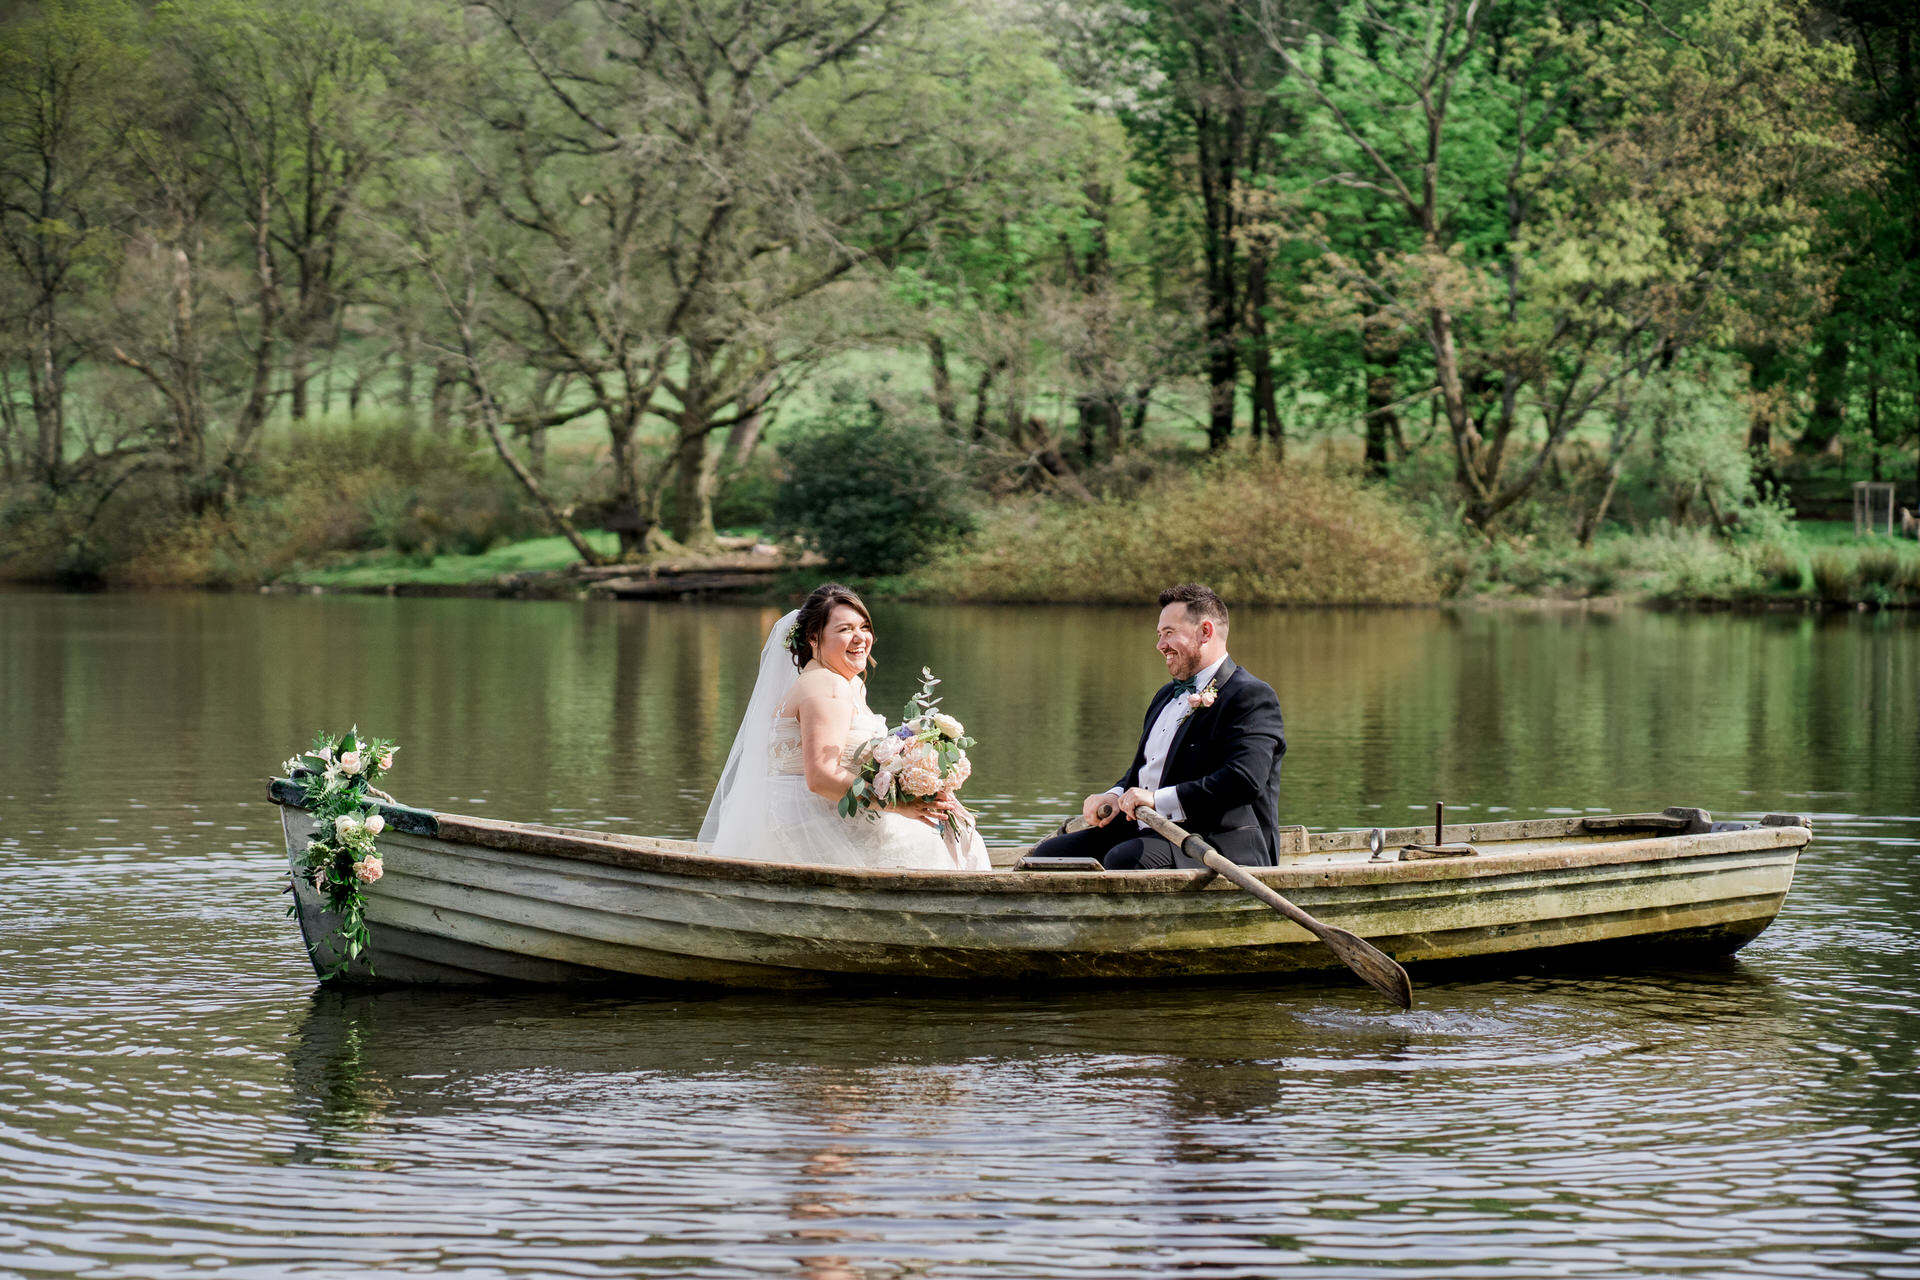 WYRESDALE PARK WEDDING bride and groom in a boat